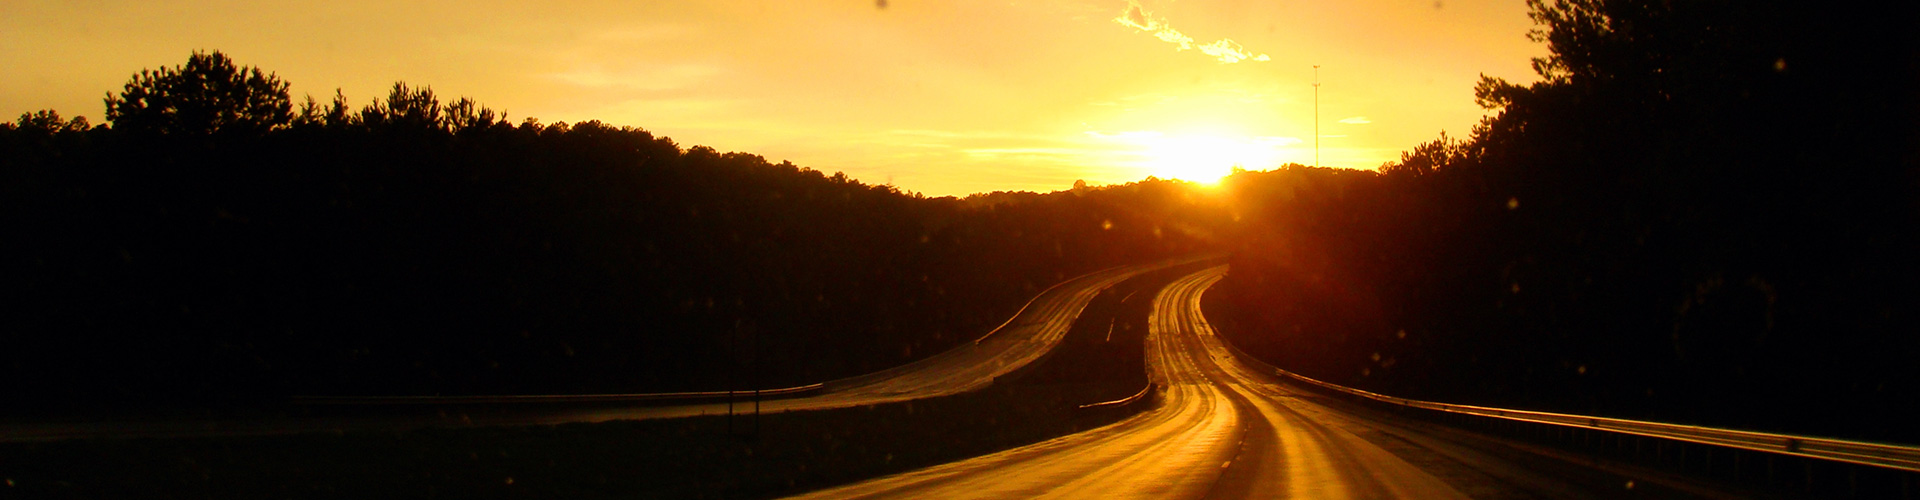 Southern sunset over four lane highway